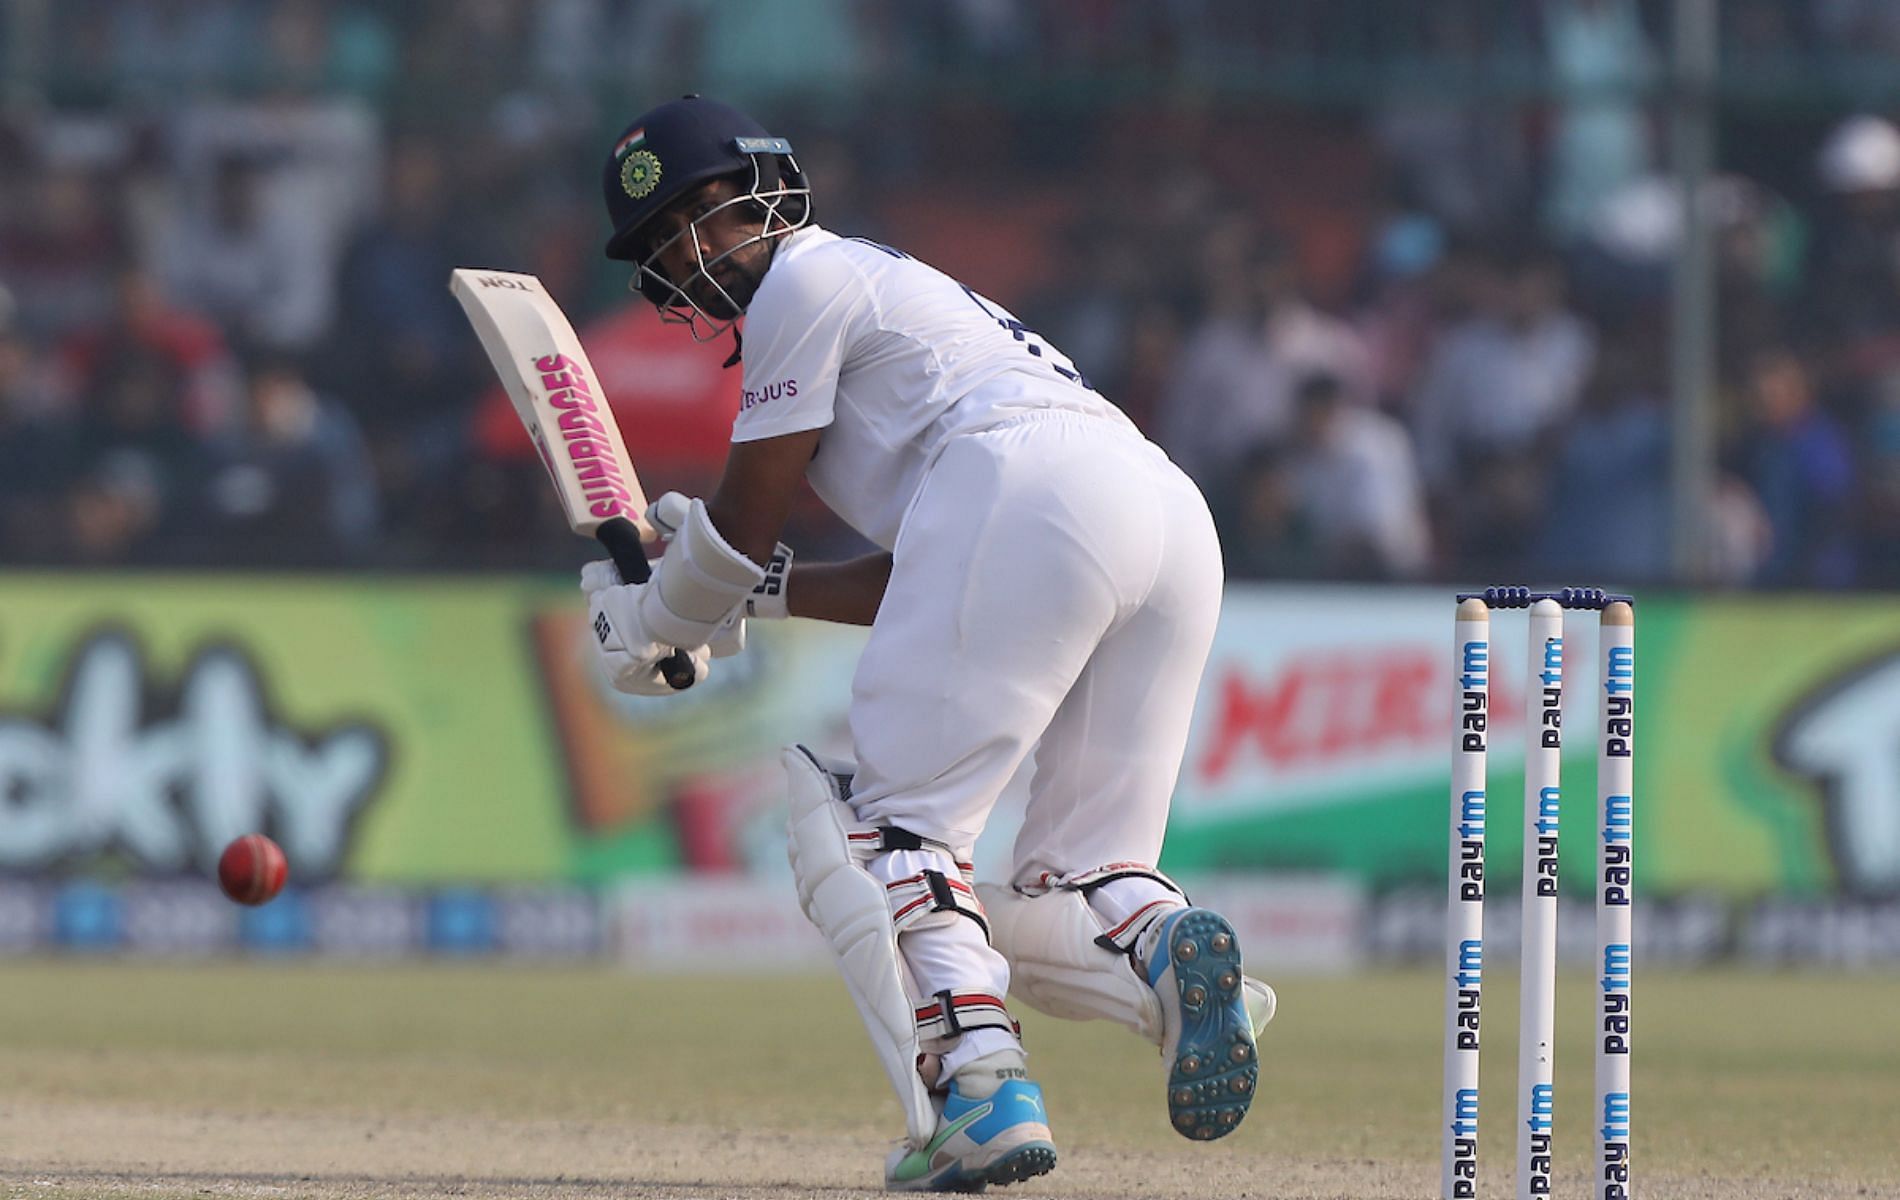 Wriddhiman Saha hit an unbeaten 61 in the second innings against New Zealand in Kanpur.